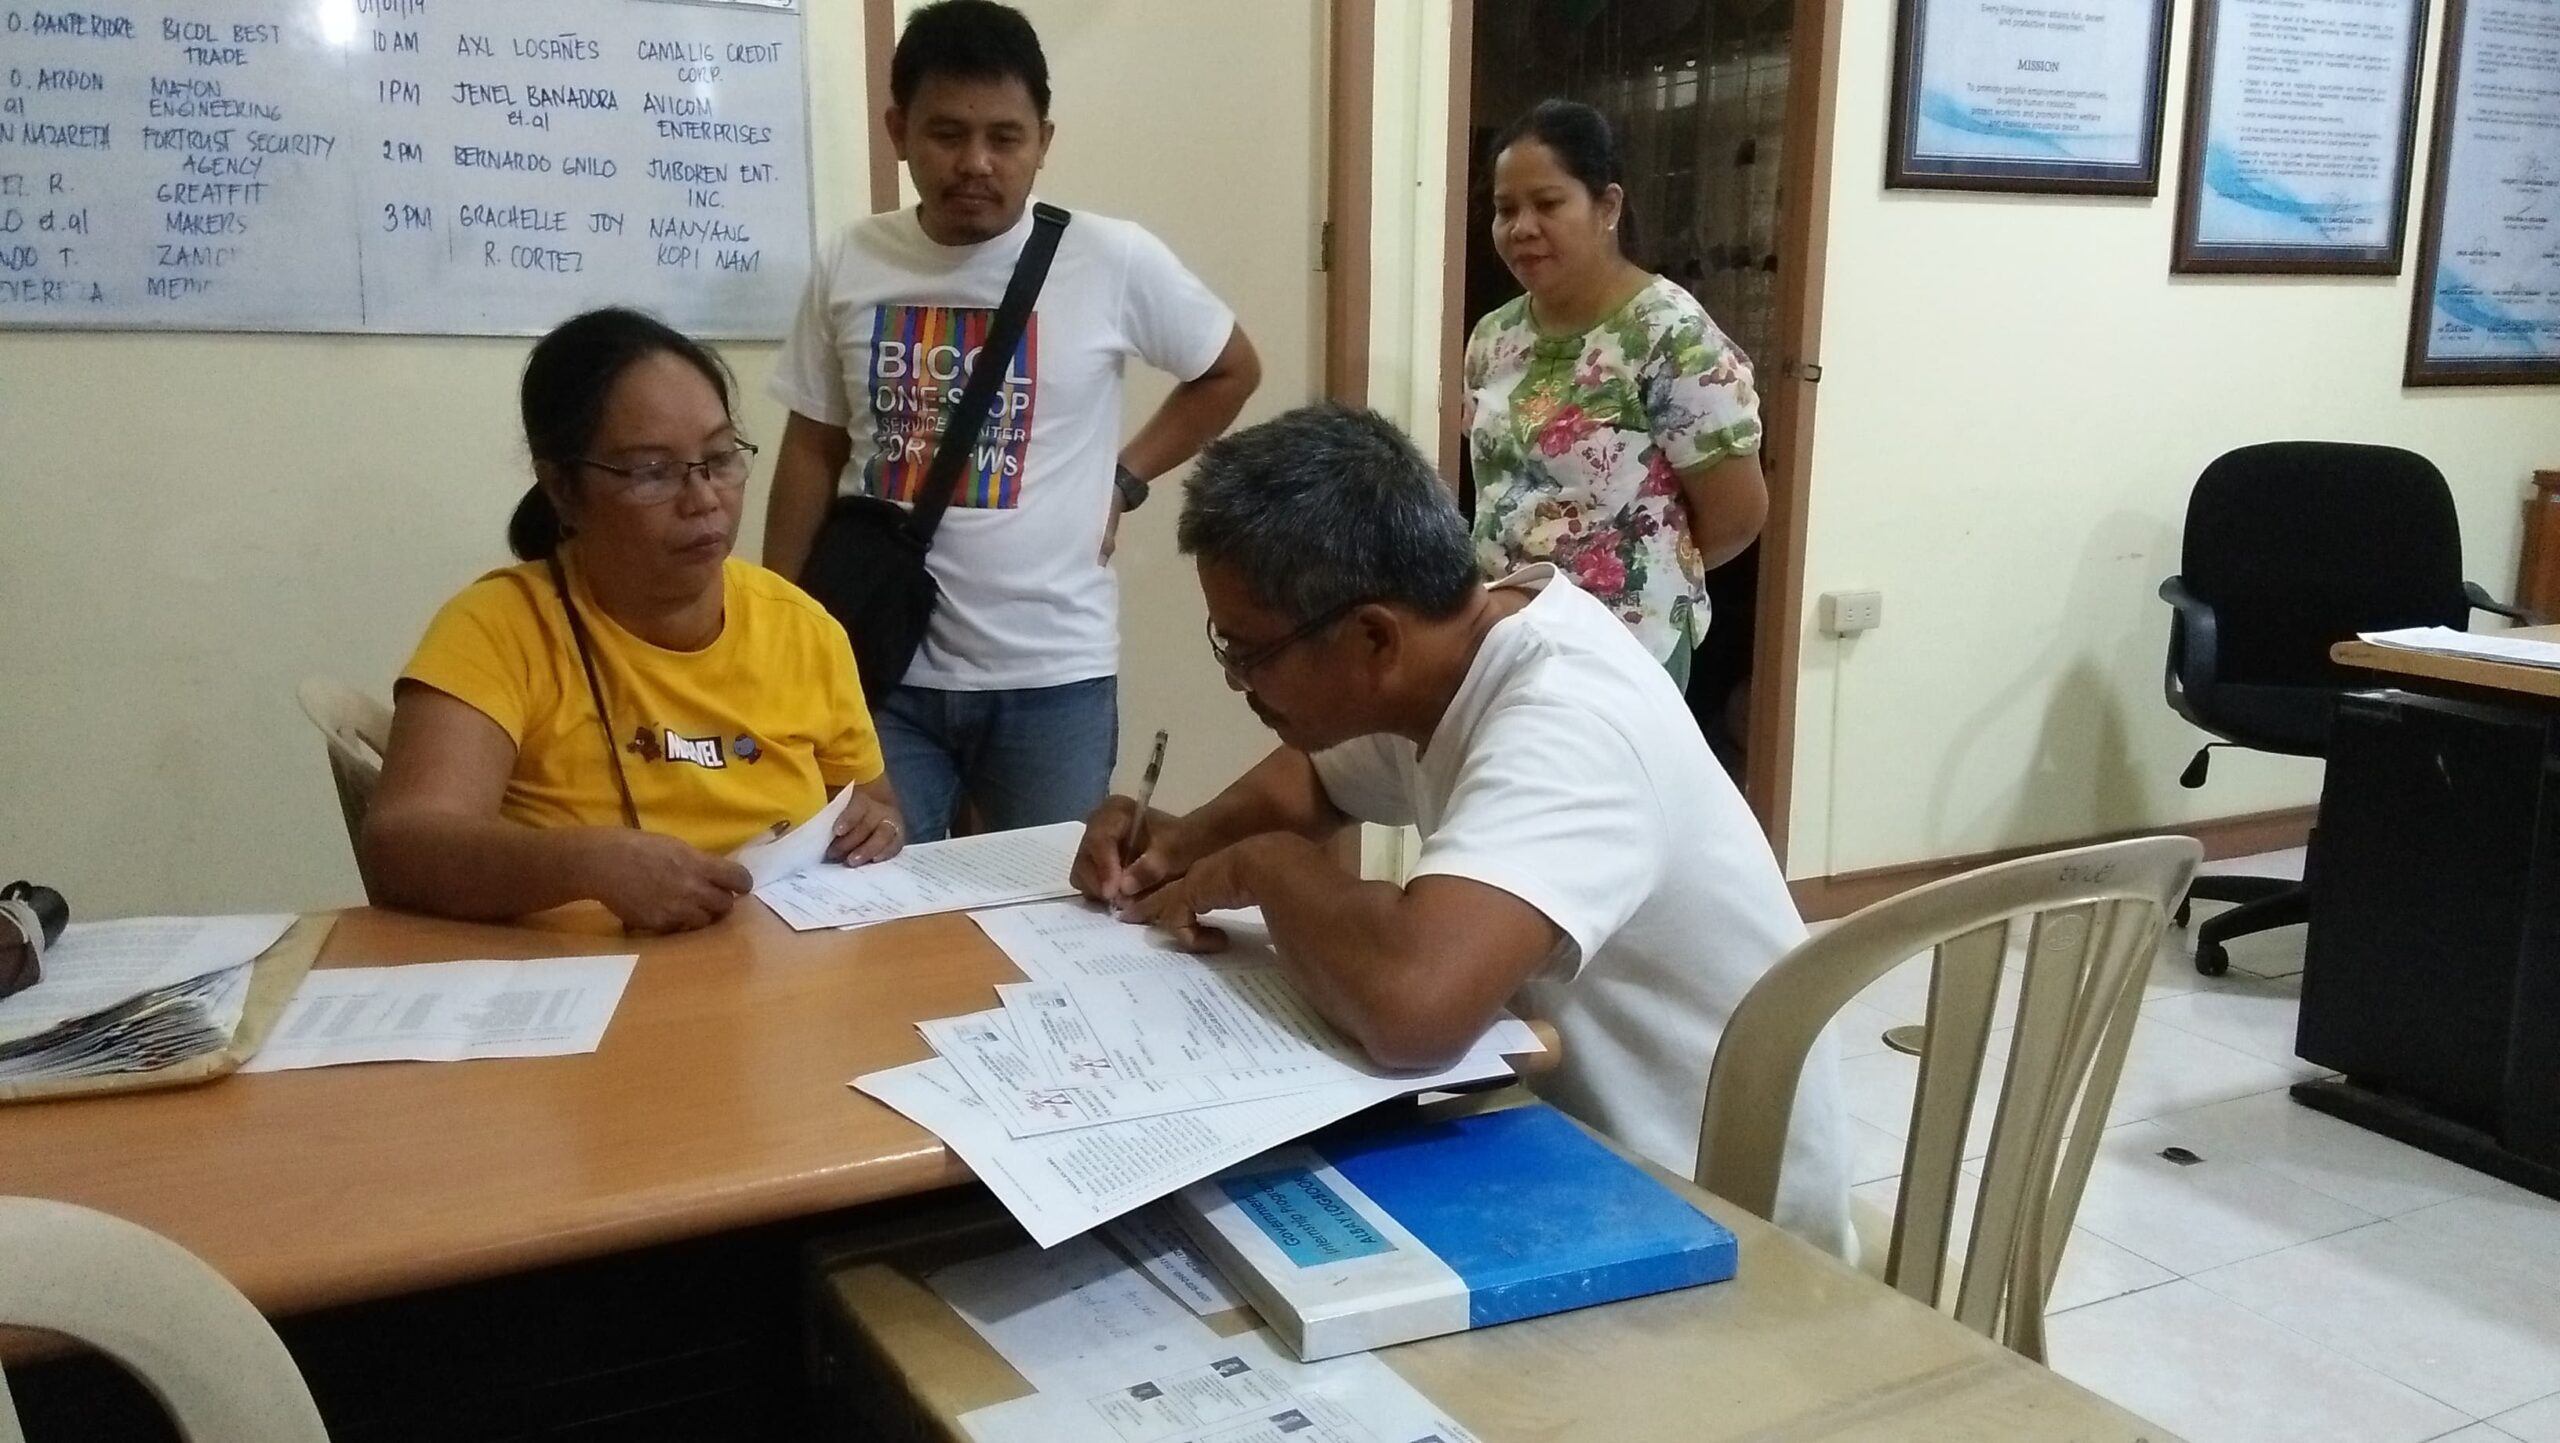 Bicol workers get due payment, employment benefits through DOLE’s SEnA